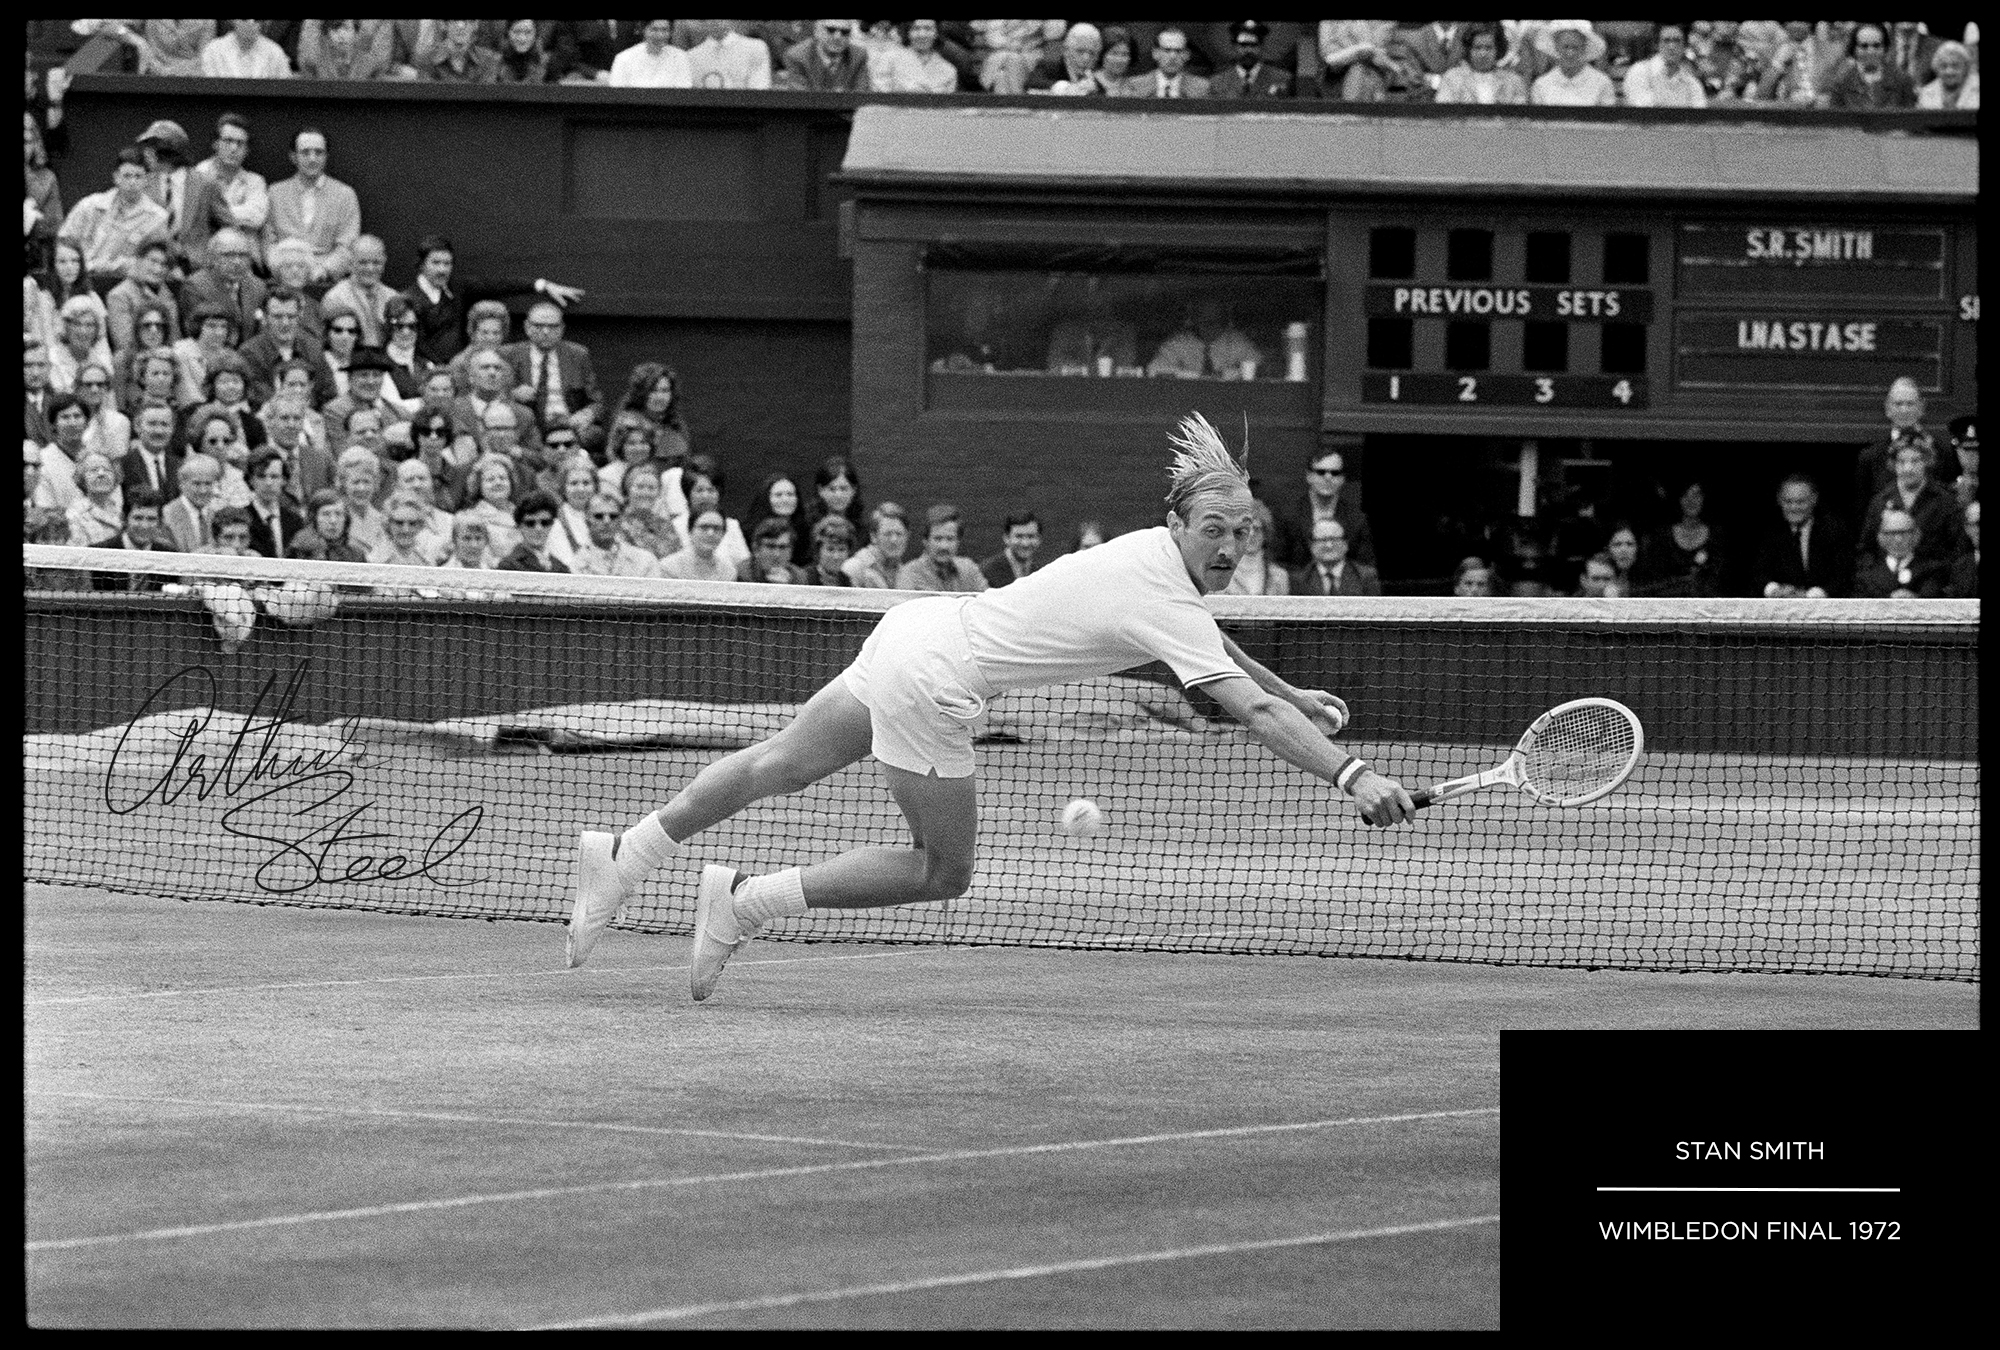 rare-black-and-white-photograph-stan-smith-wimbledon-tennis-championships-by-british-photographer-arthur-steel